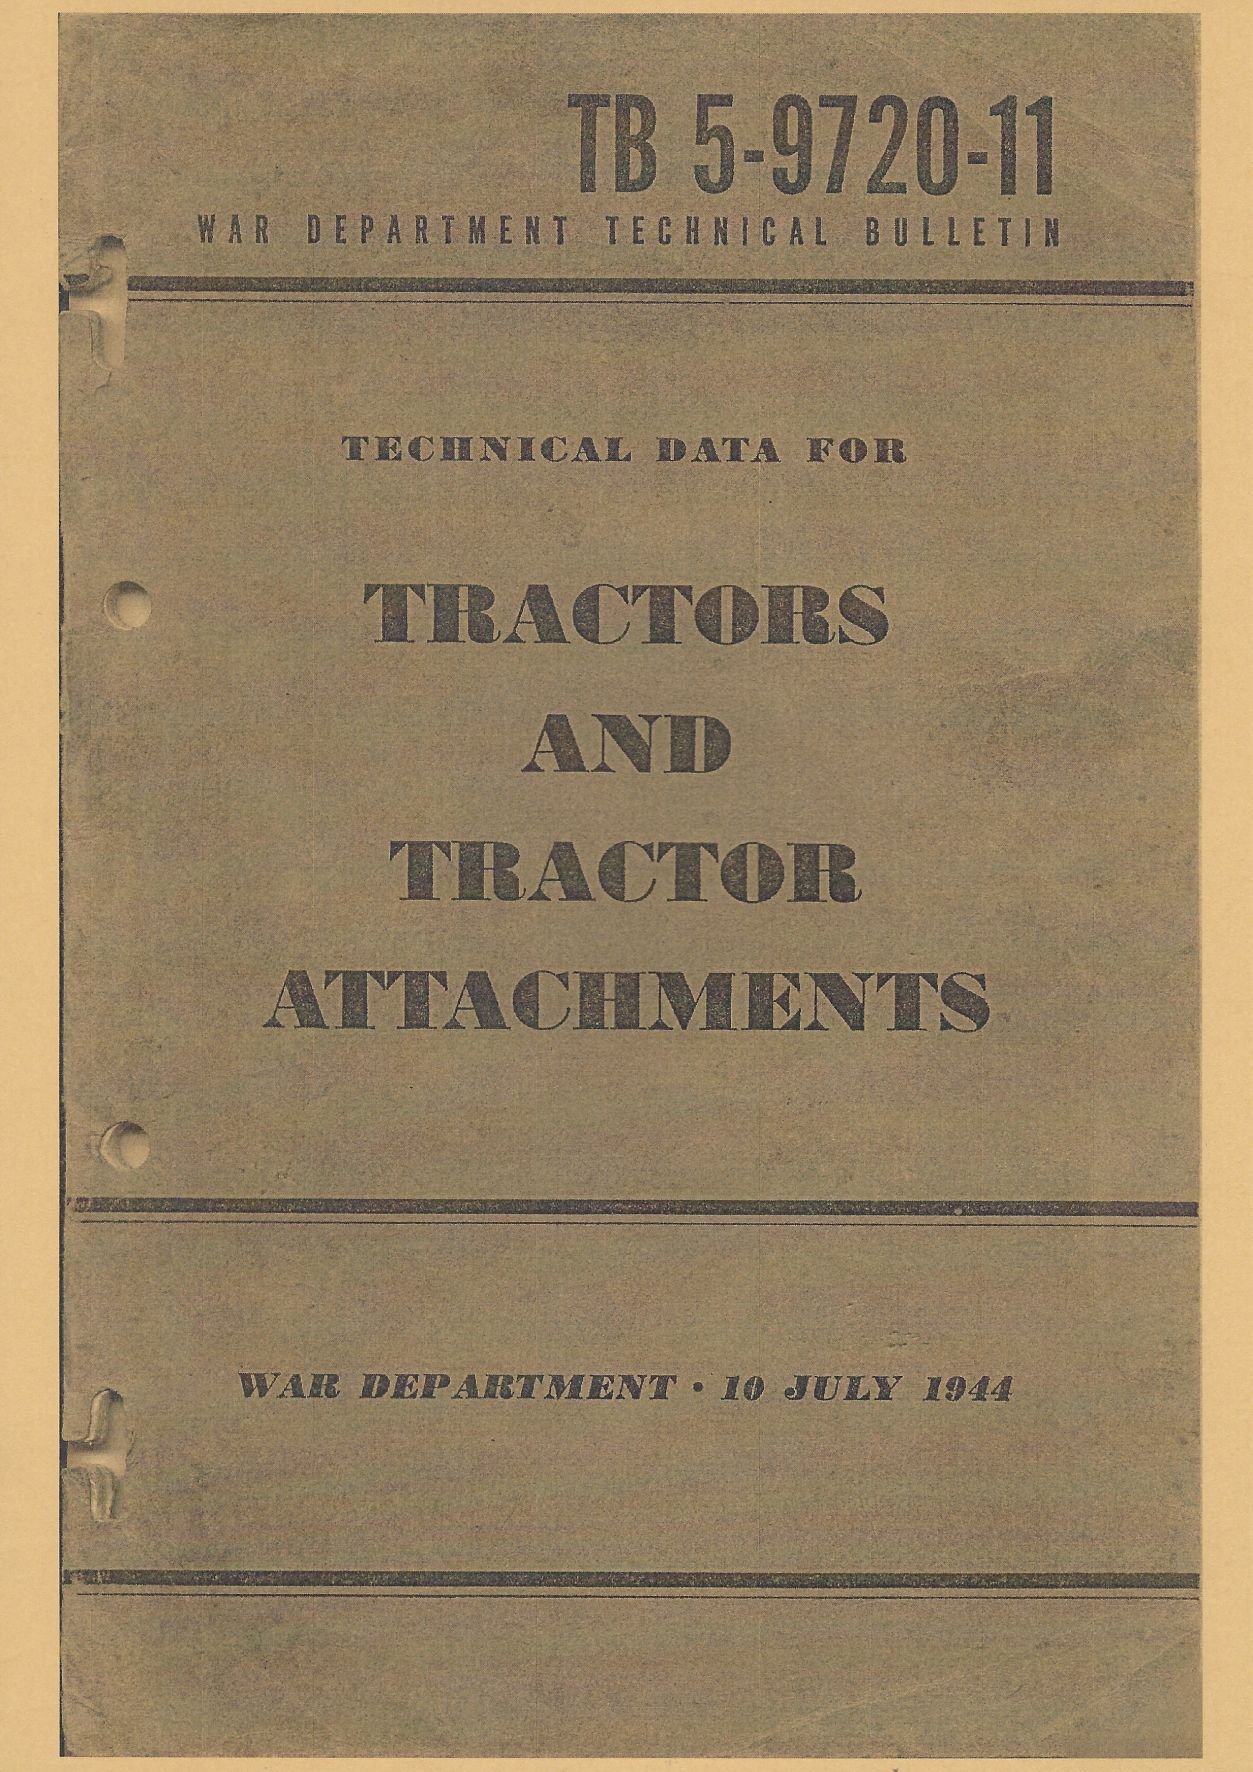 TB 5-9720-11 TECHNICAL DATA FOR TRACTORS AND ATTACHMENTS